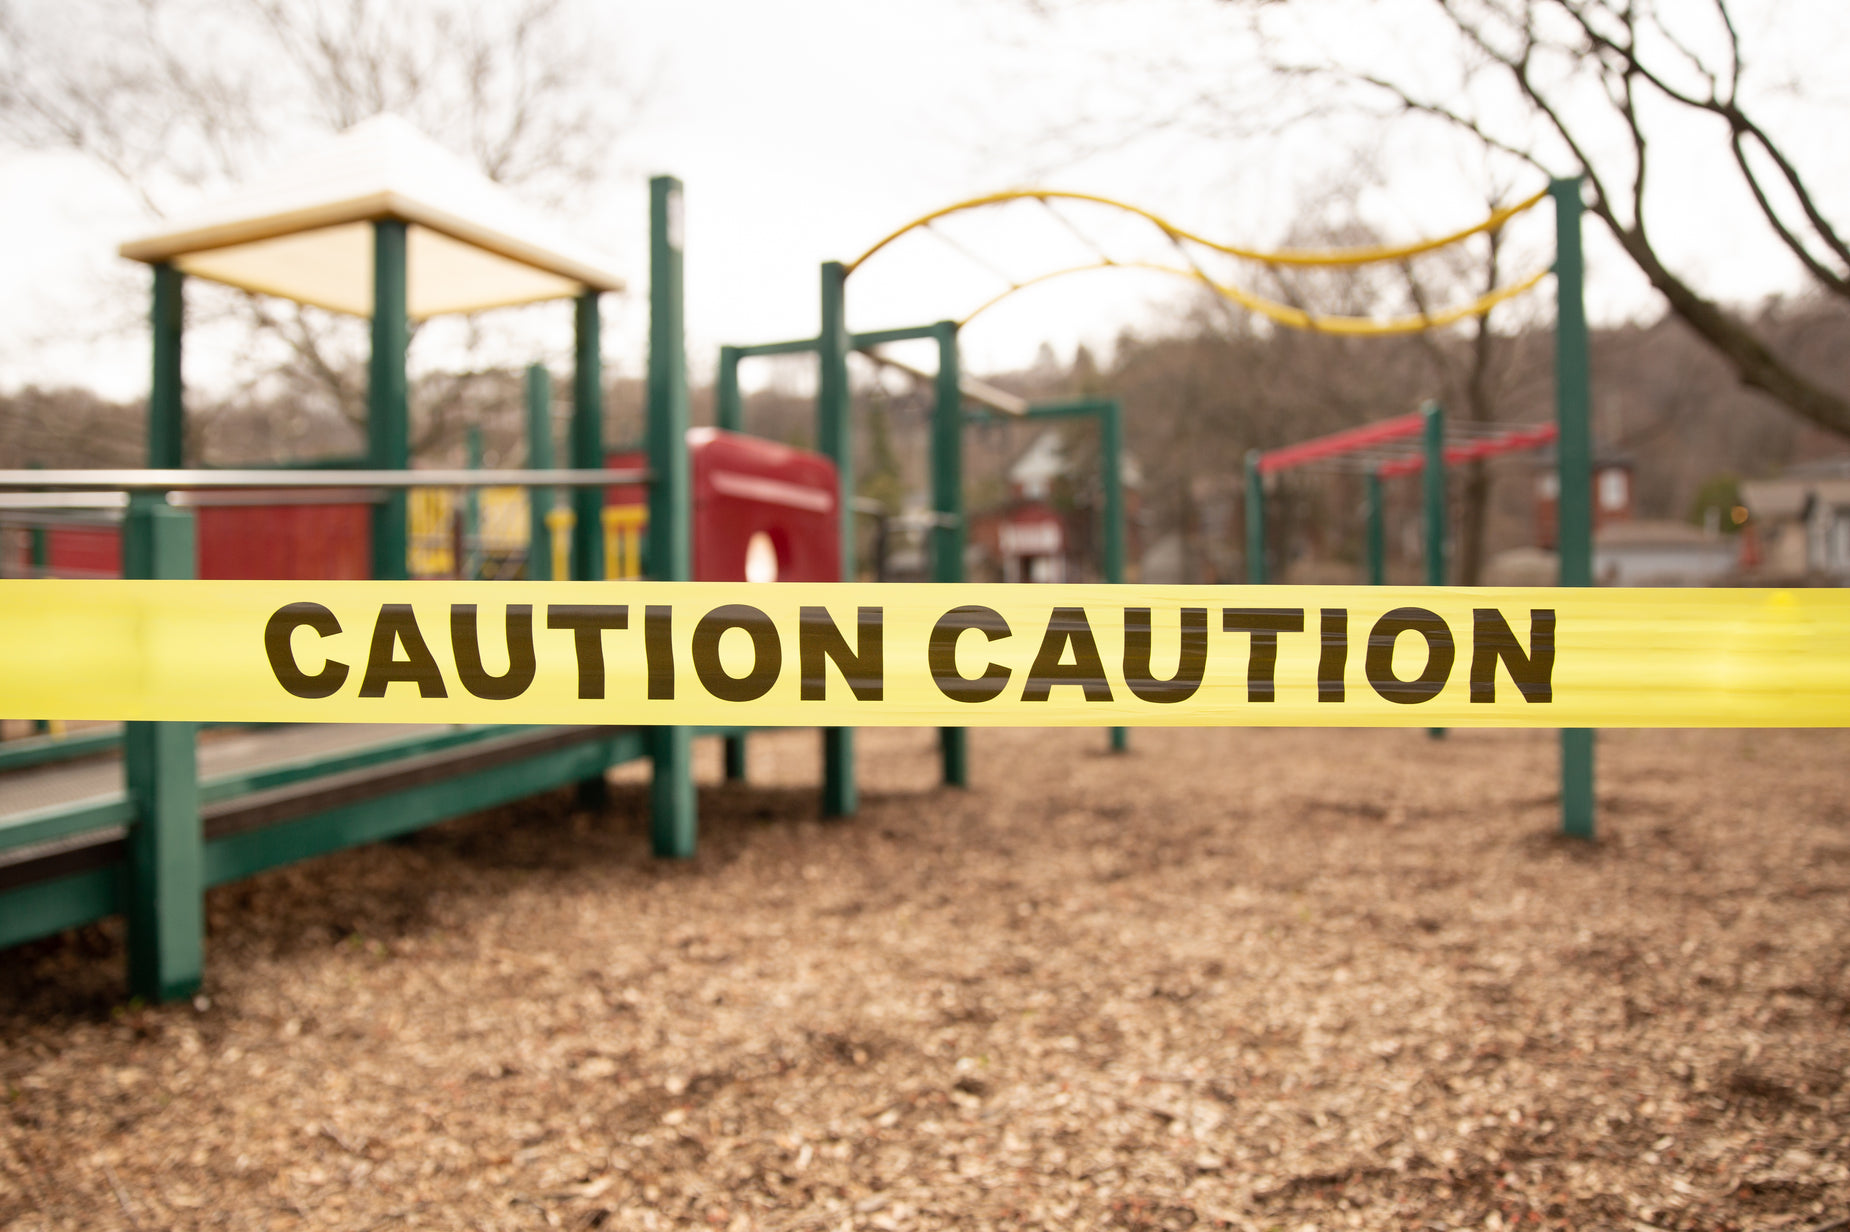 a caution tape sits on the ground near some playground equipment